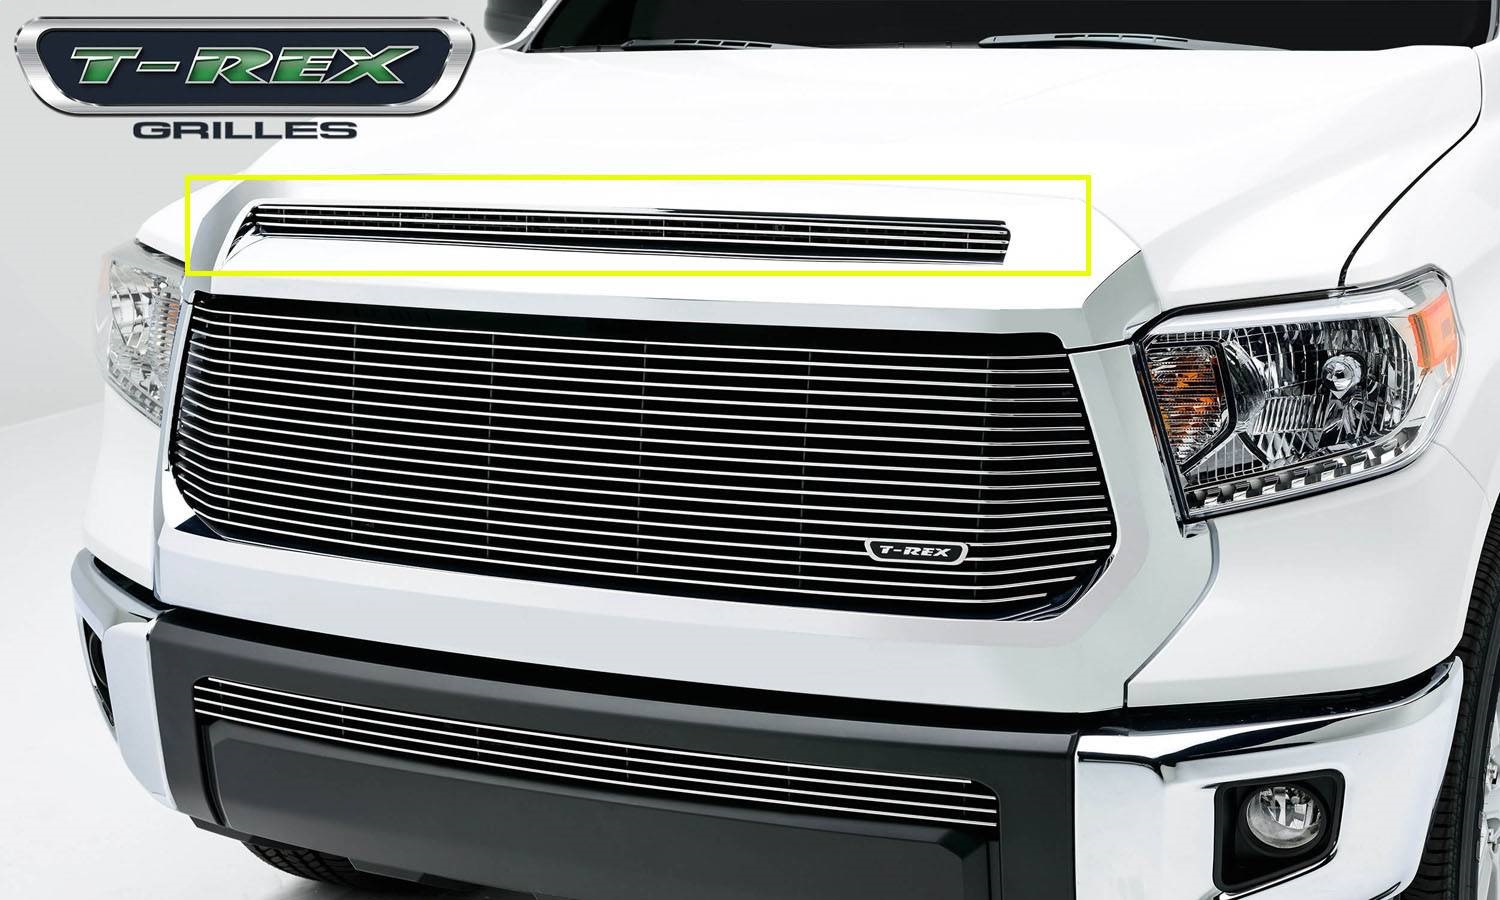 T-Rex Grilles 21964 Billet Series Grille Fits 14-21 Tundra